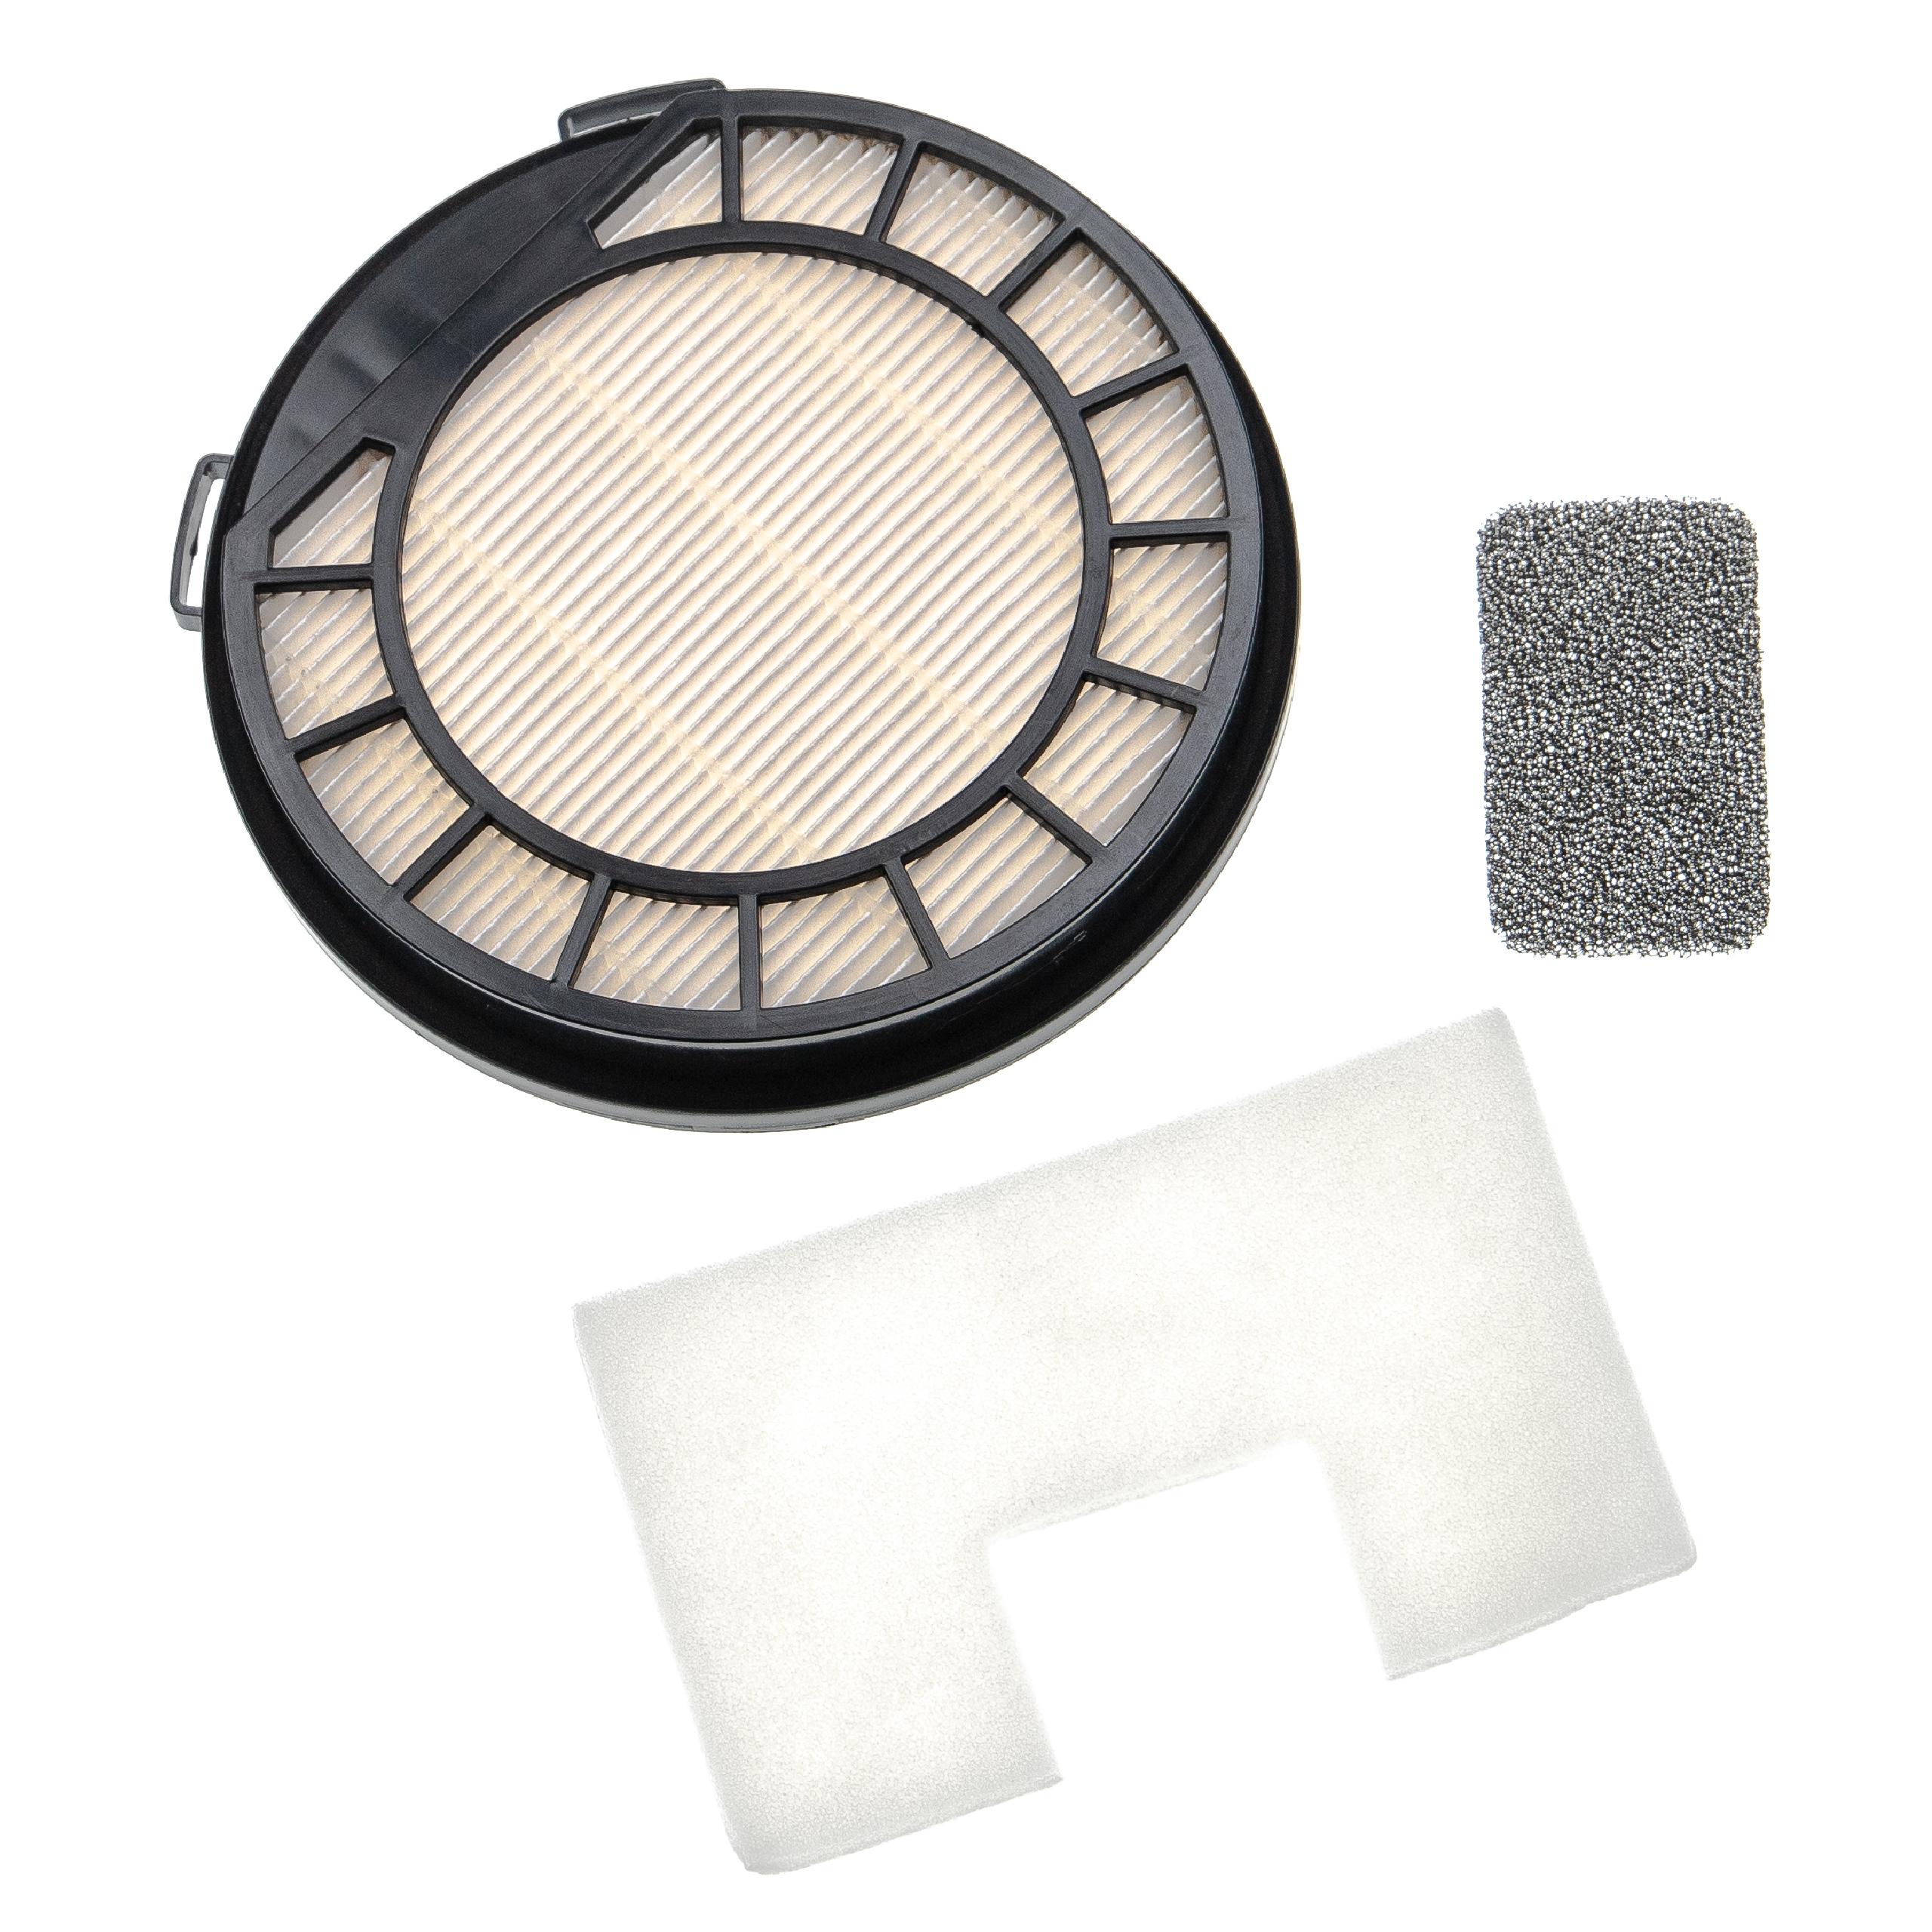 Filter Set replaces Vax Type 69, 1113253900, 1713248500 for Vax Vacuum Cleaner - 3 pcs